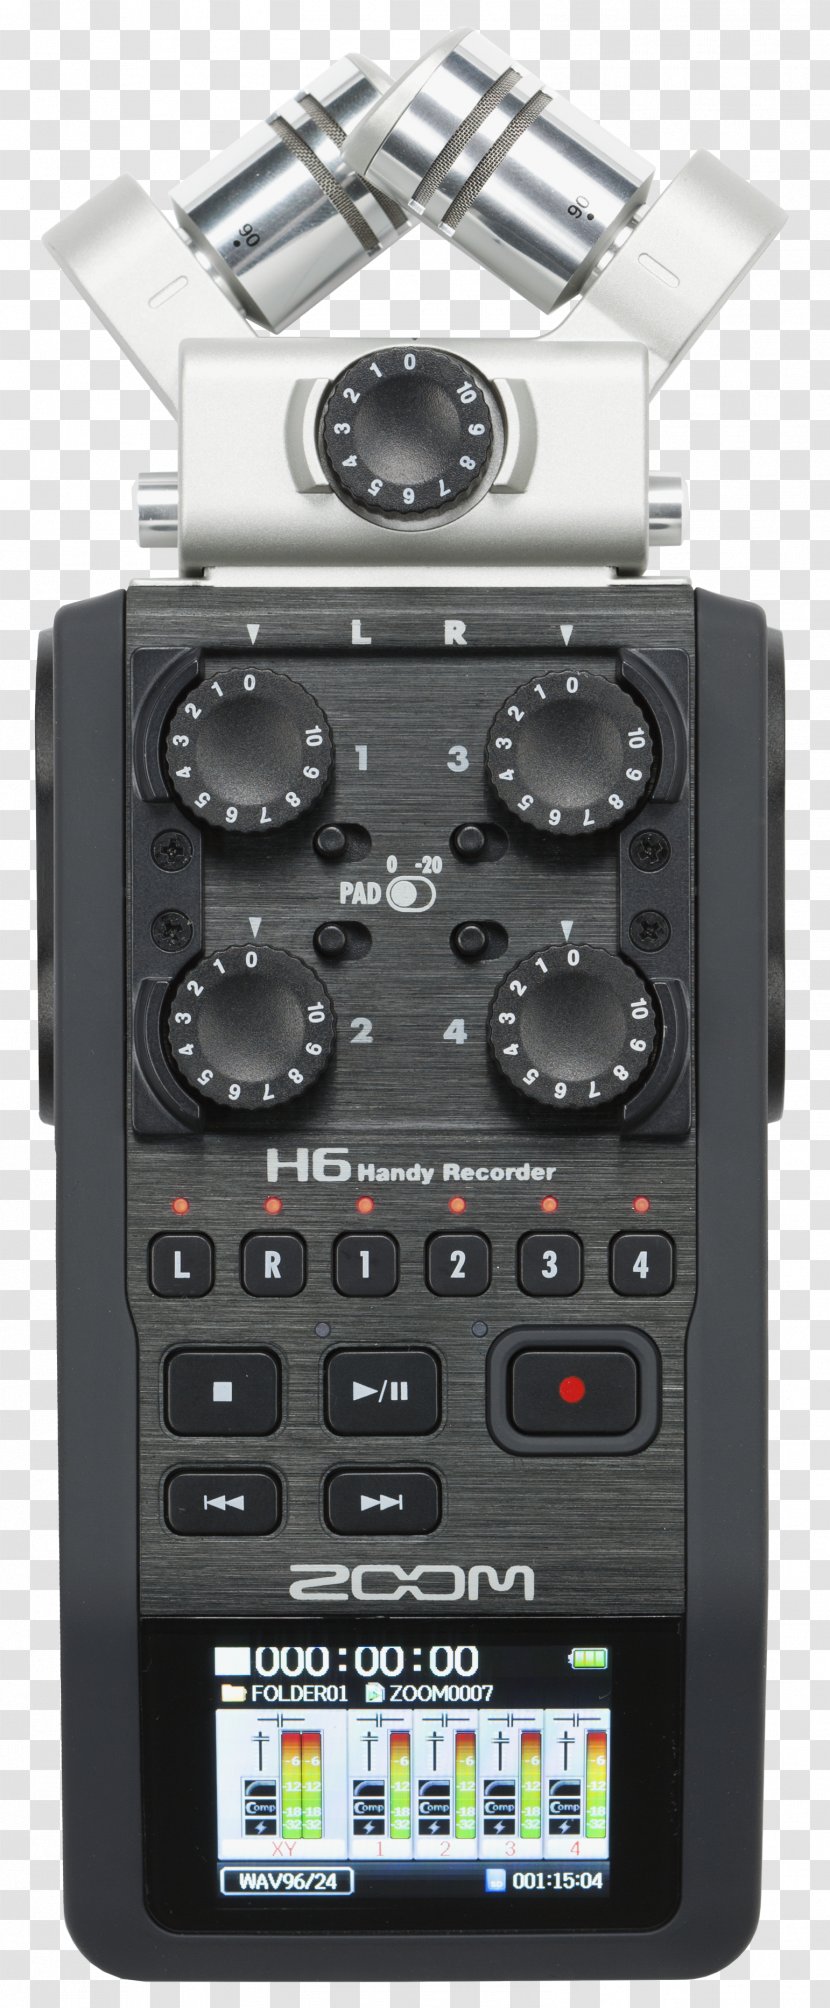 Microphone Zoom Corporation Audio Sound Recording And Reproduction H2 Handy Recorder - Tree - Mic Transparent PNG